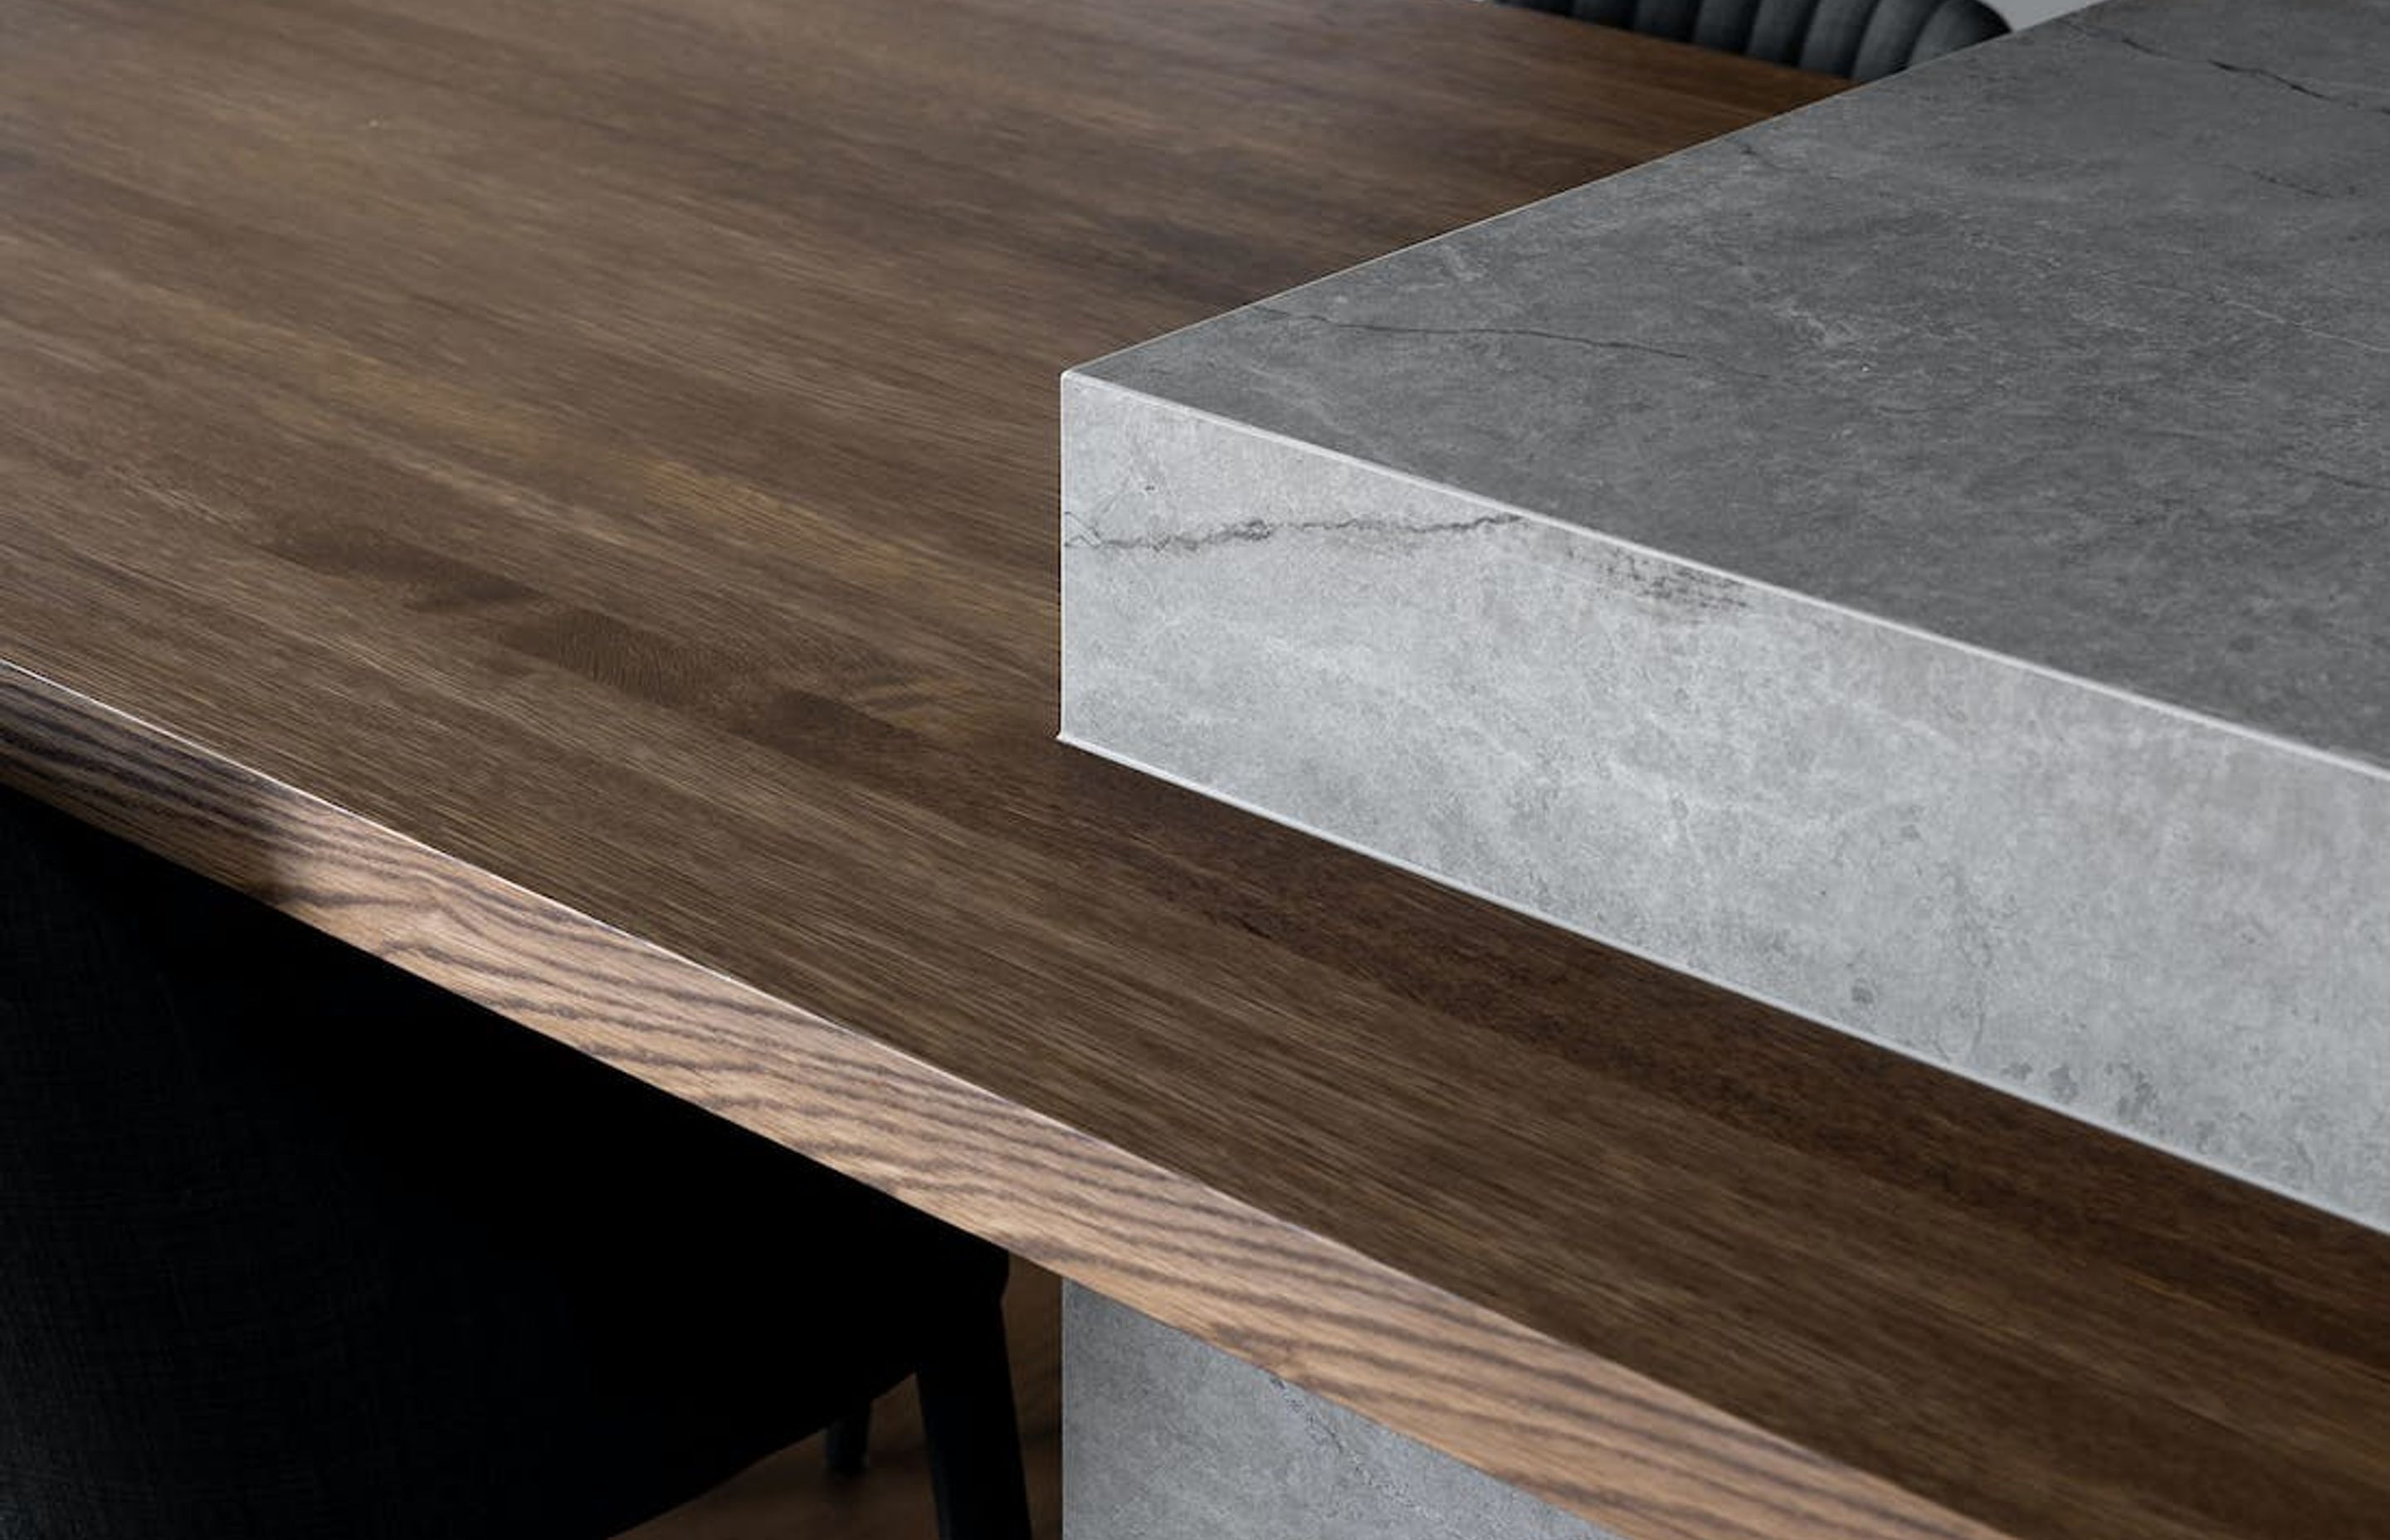 Two Dekton Colours To Match Wood In Kitchens &amp; Bathrooms